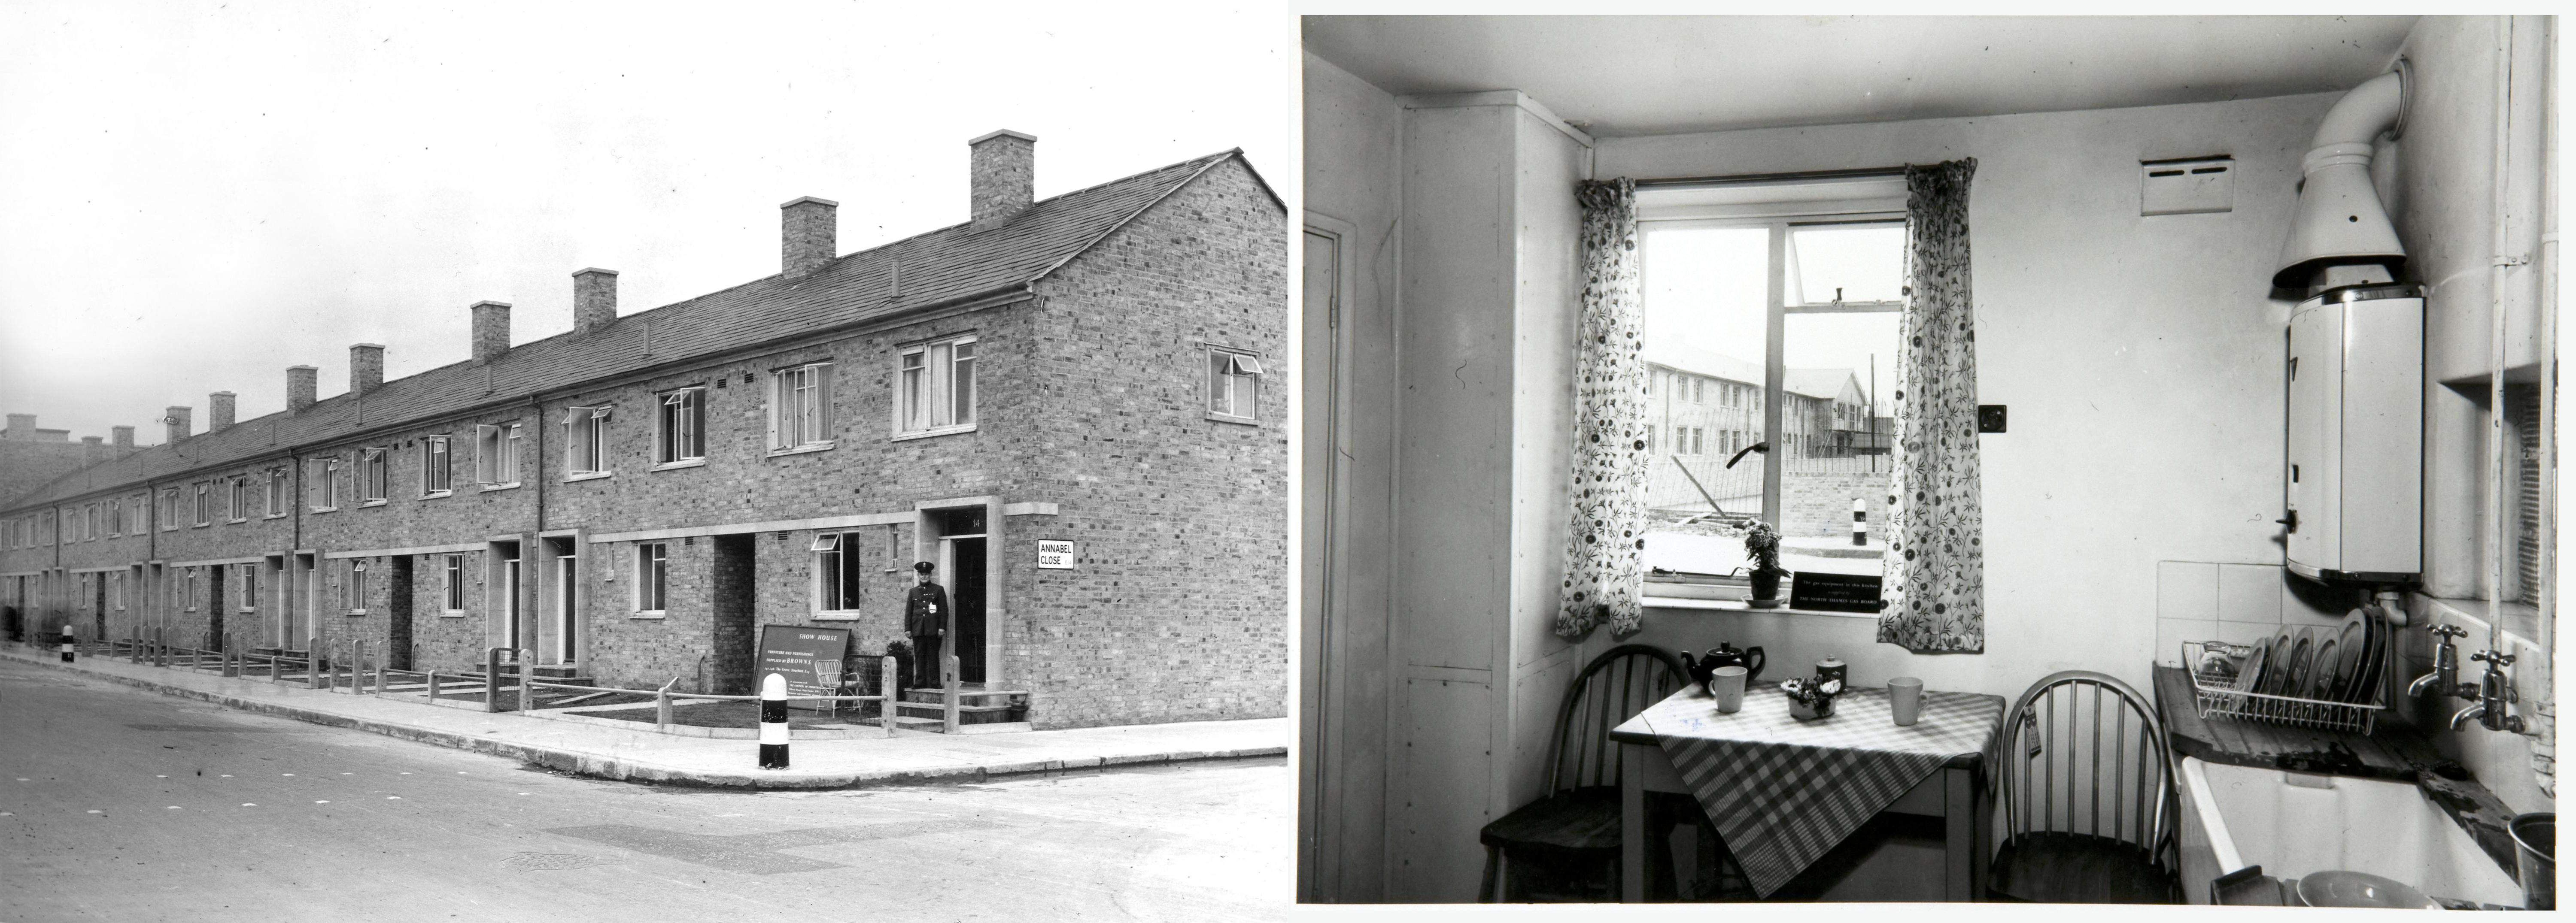 Photograph on left shows a row of houses on a residential street. Photograph on the right shows a kitchen interior with two chairs next to a small dining table.